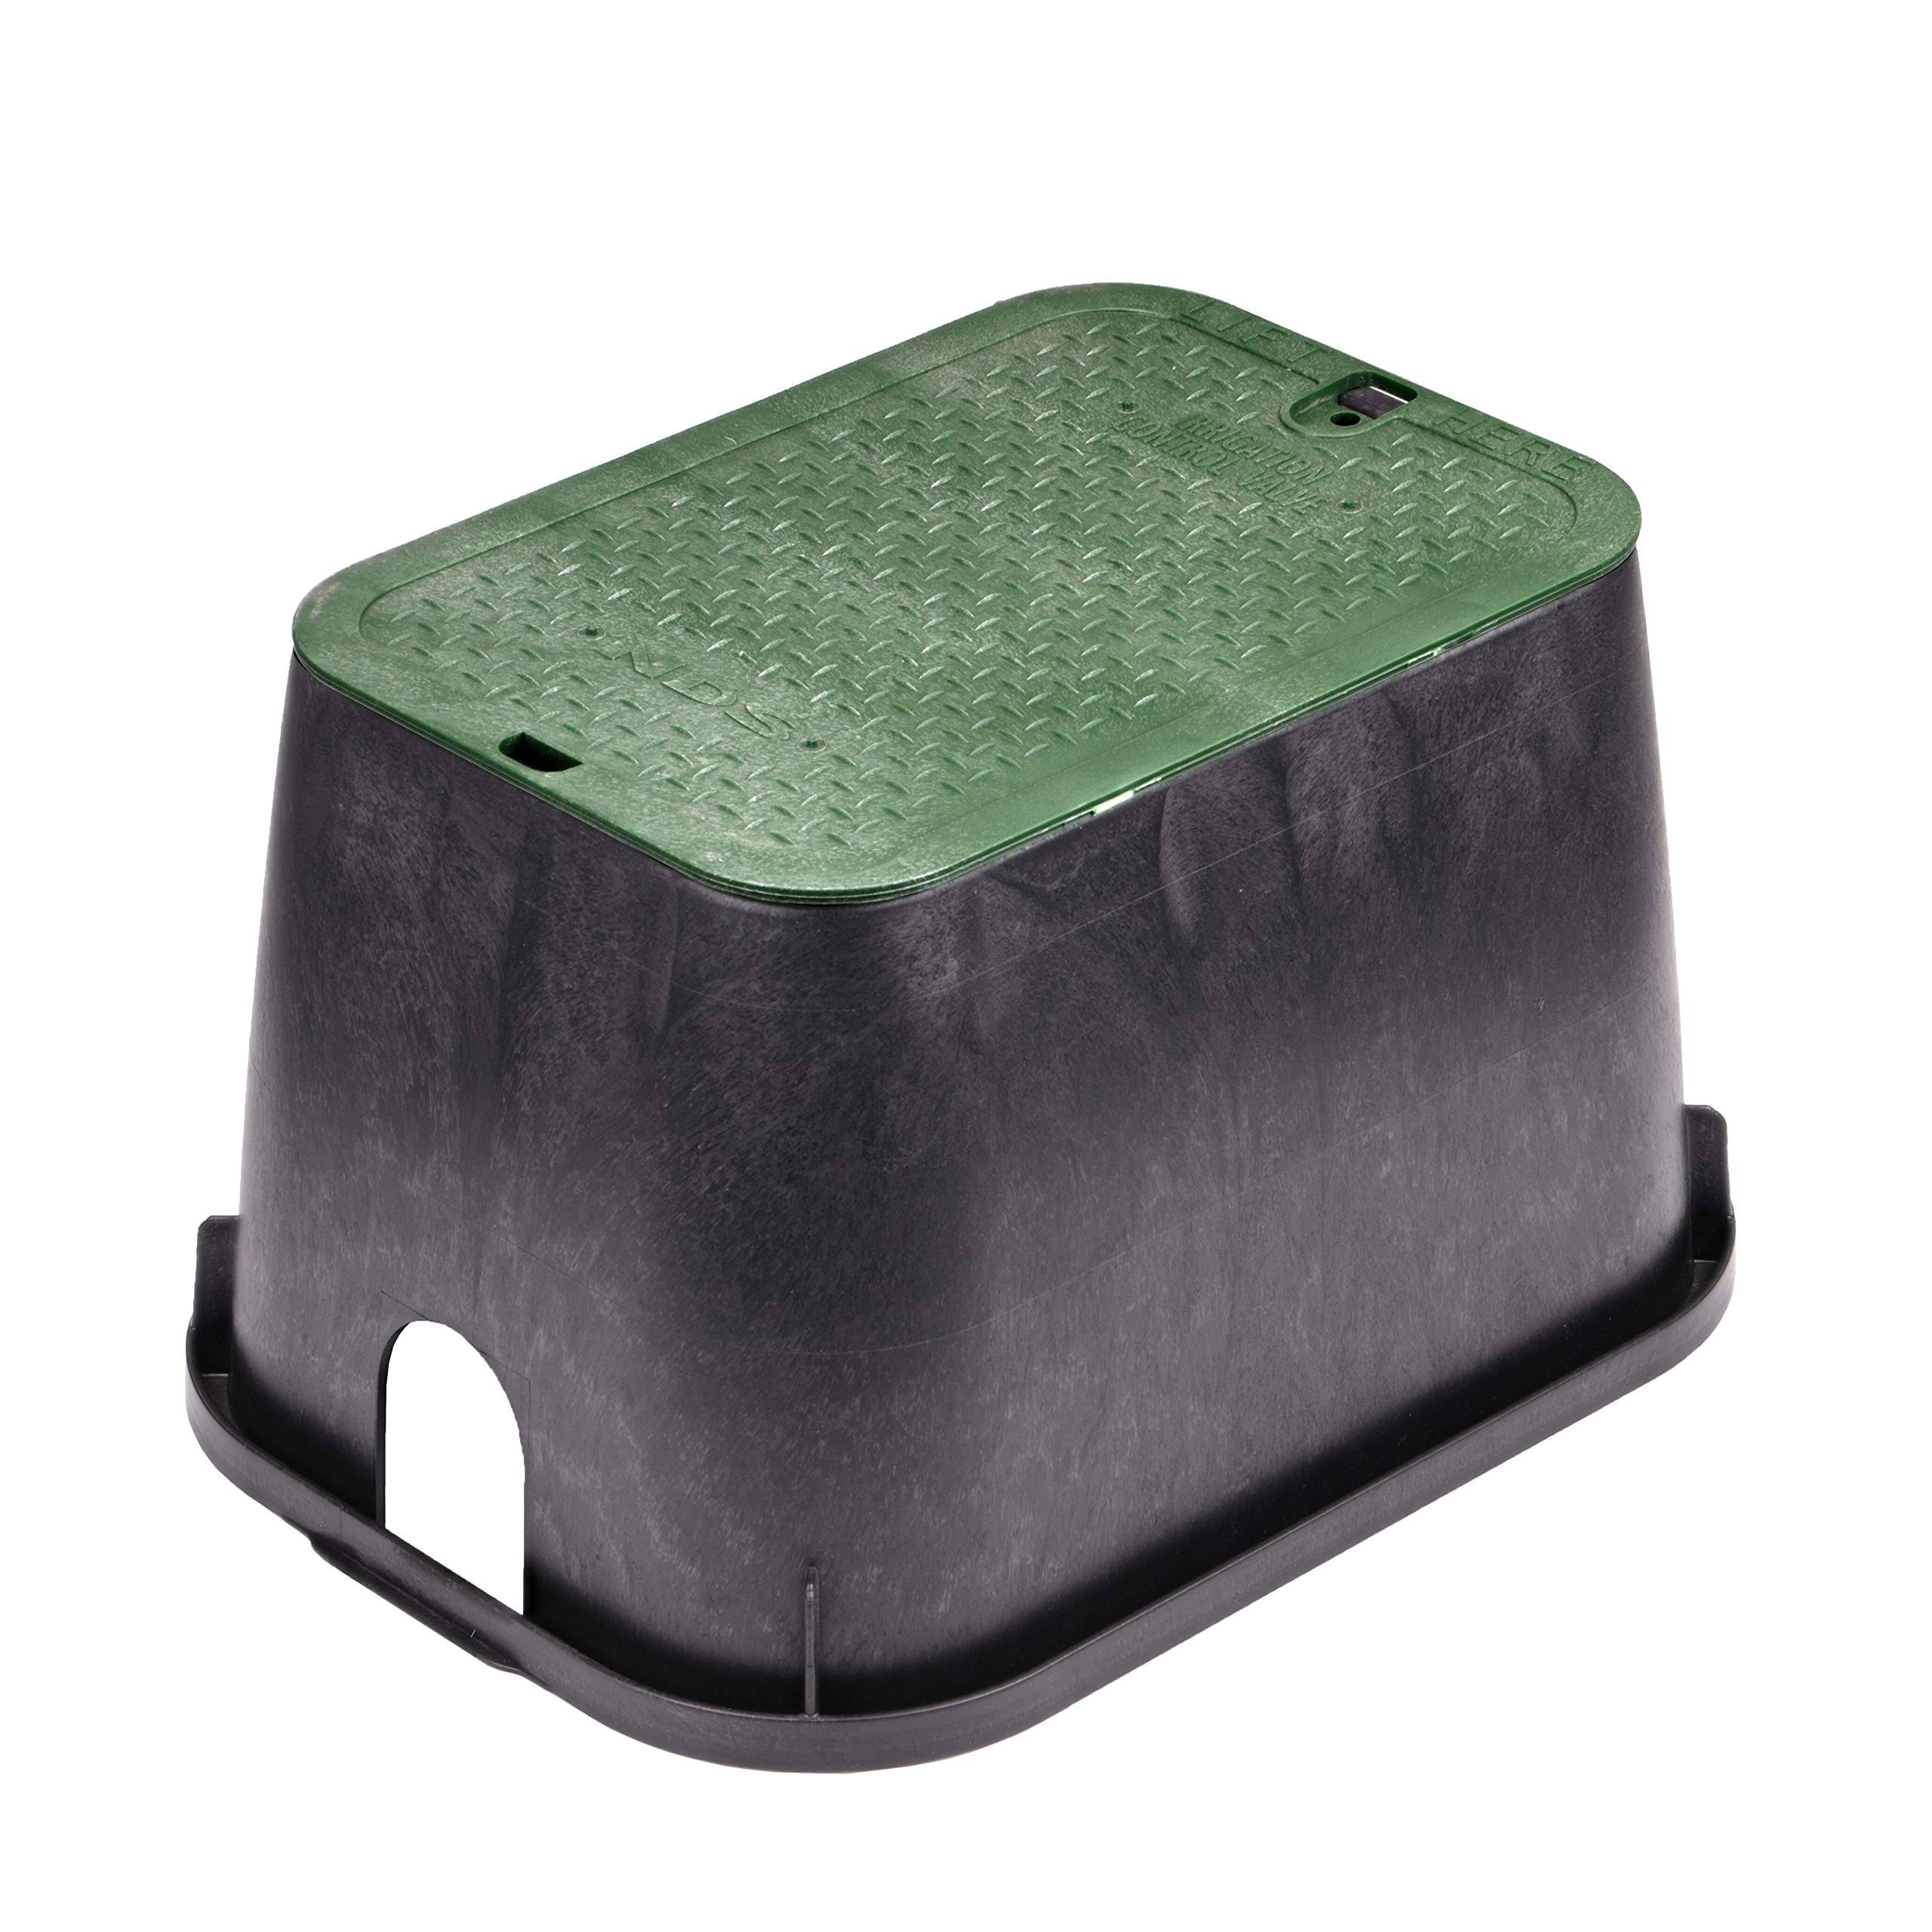 NDS 113BC Standard Series Valve Box Cover - 14x19 in